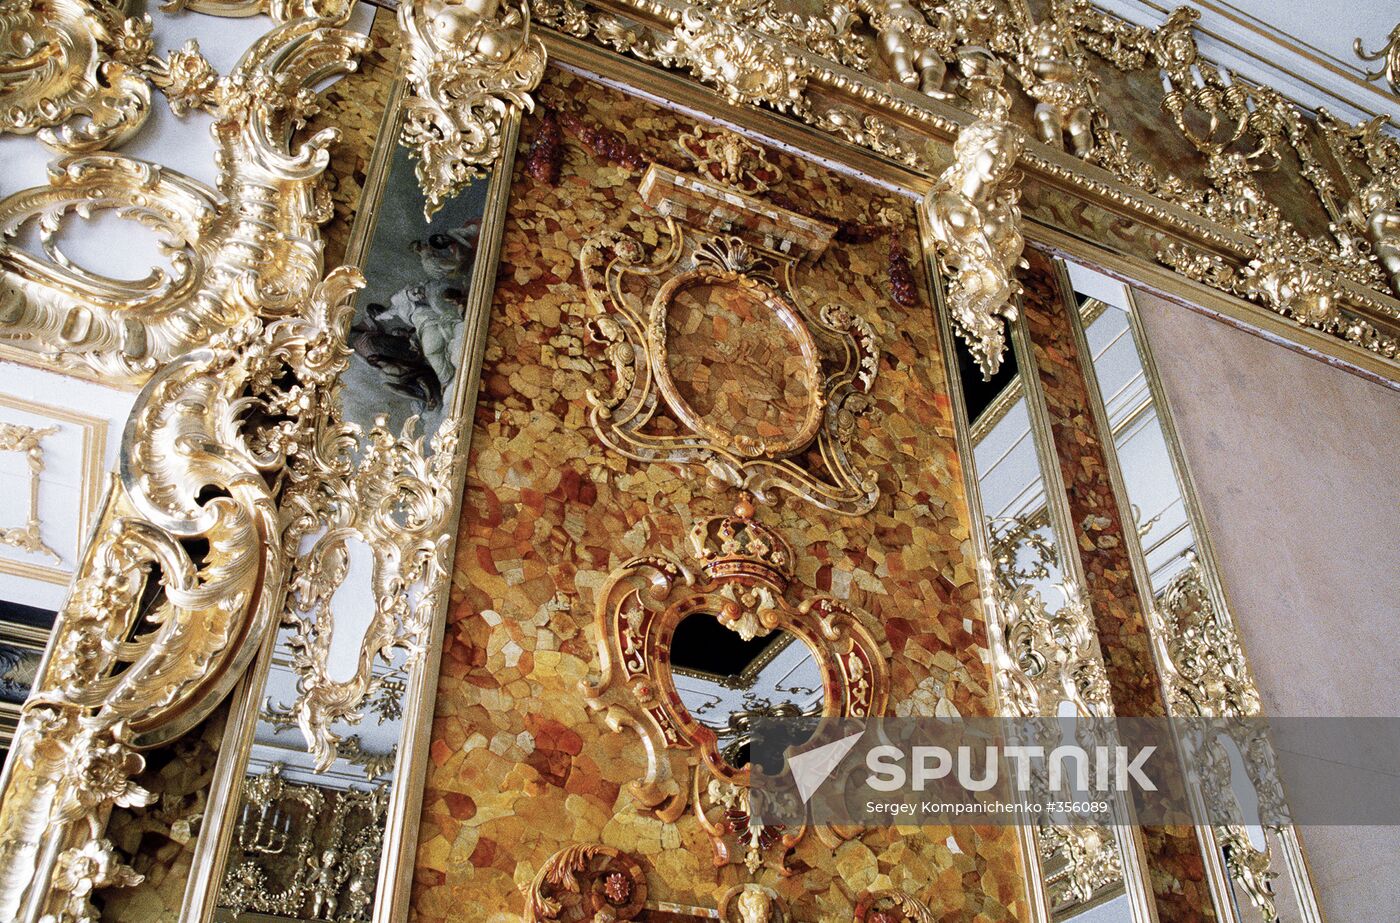 Recreation of Catherine Palace's Amber Room